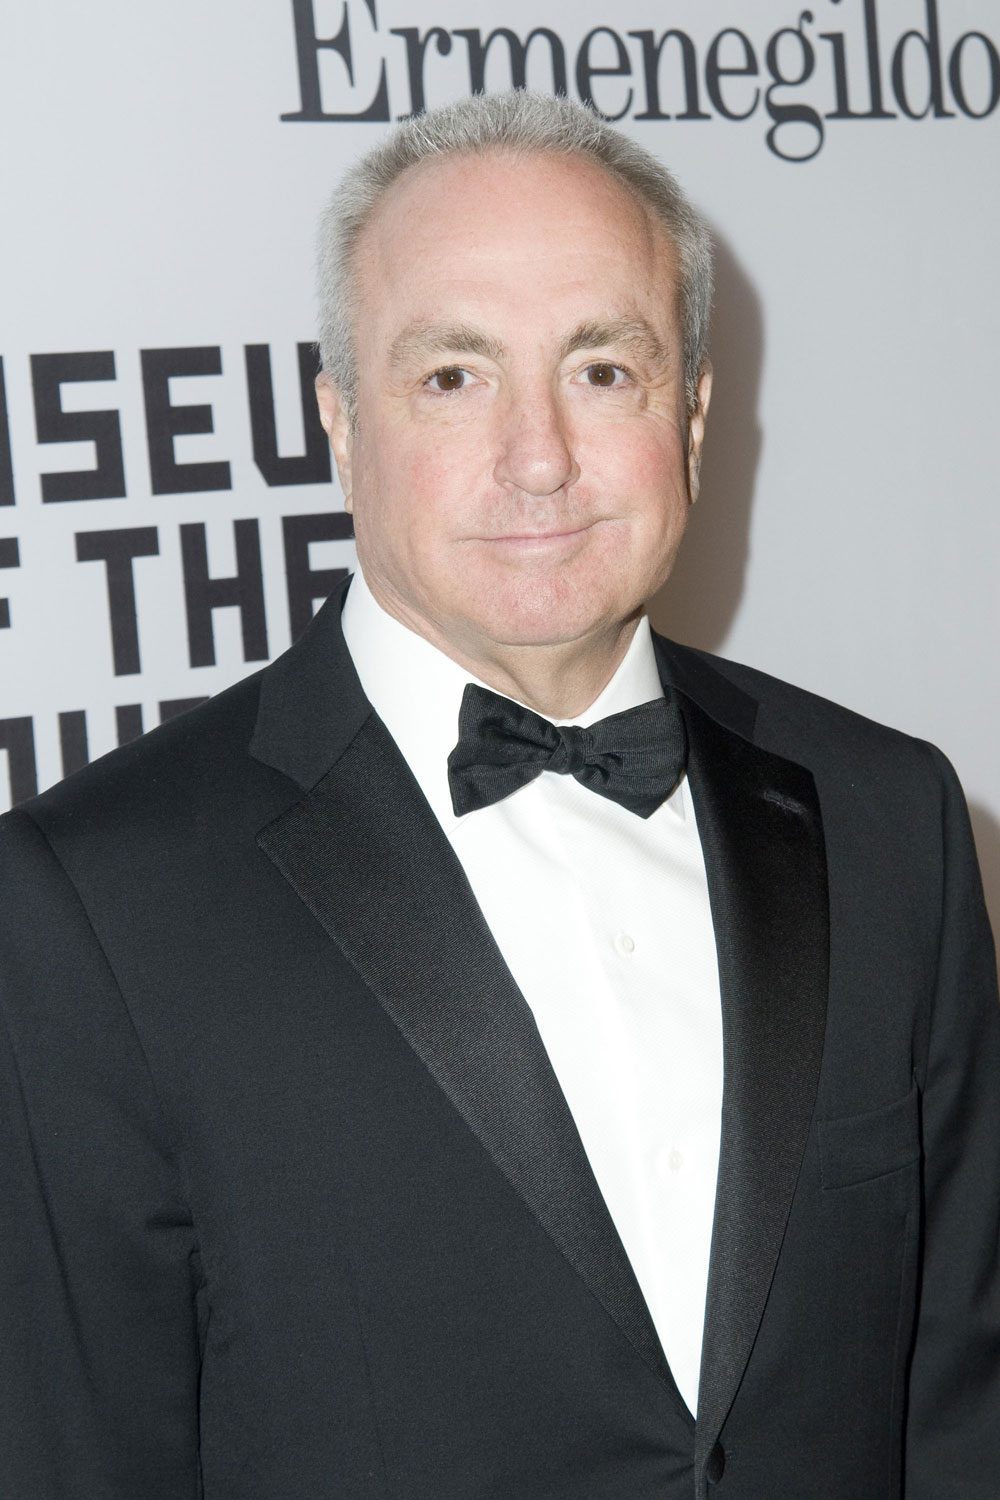 Lorne Michaels Unsure About The Future Of 'SNL'